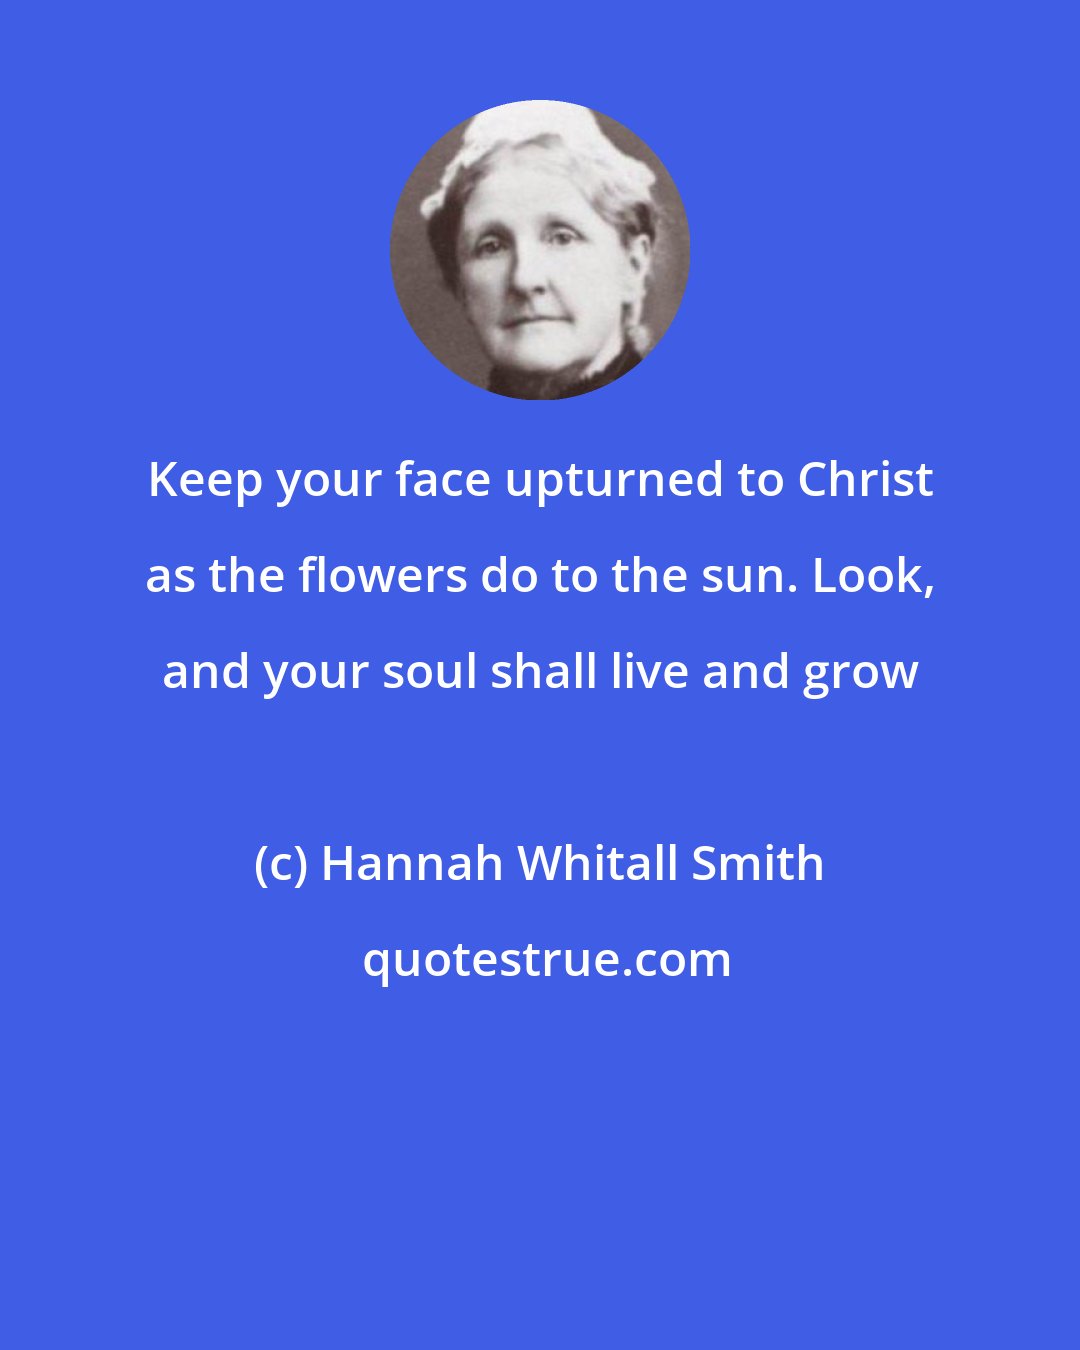 Hannah Whitall Smith: Keep your face upturned to Christ as the flowers do to the sun. Look, and your soul shall live and grow